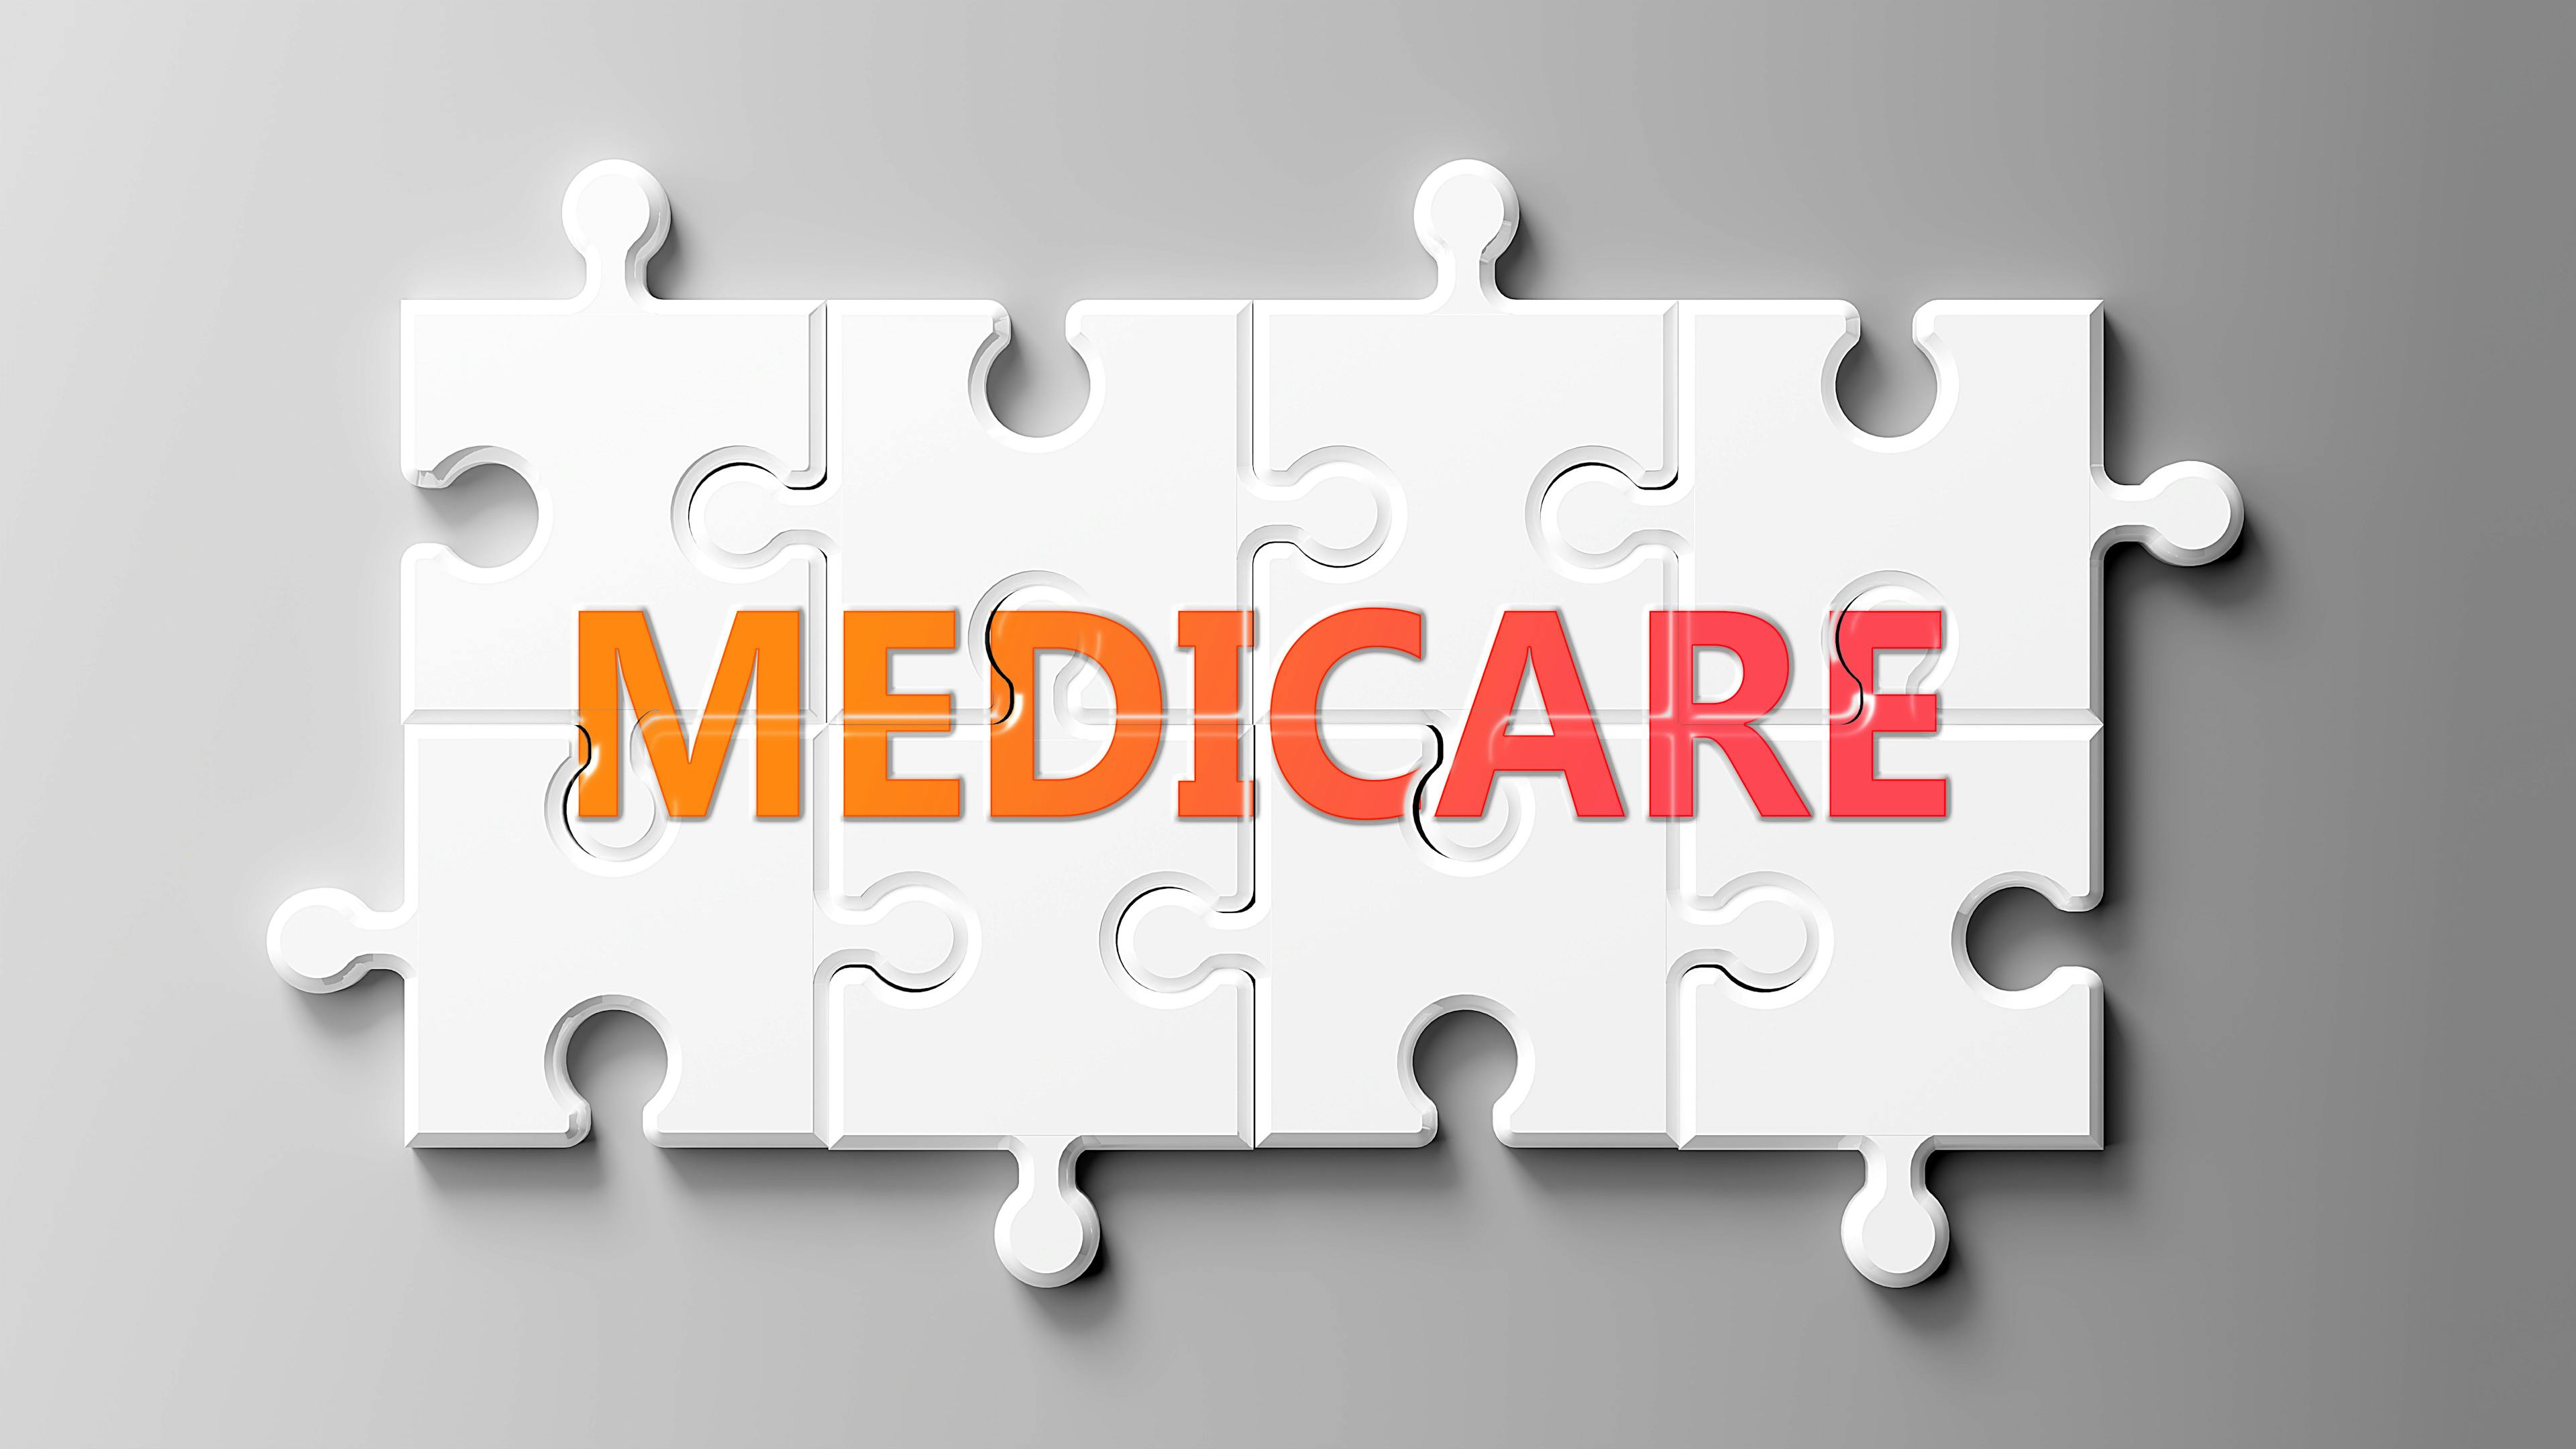 The word Medicare in orange on white puzzle pieces | Image credit: @Goodideas stock.adobe.com 